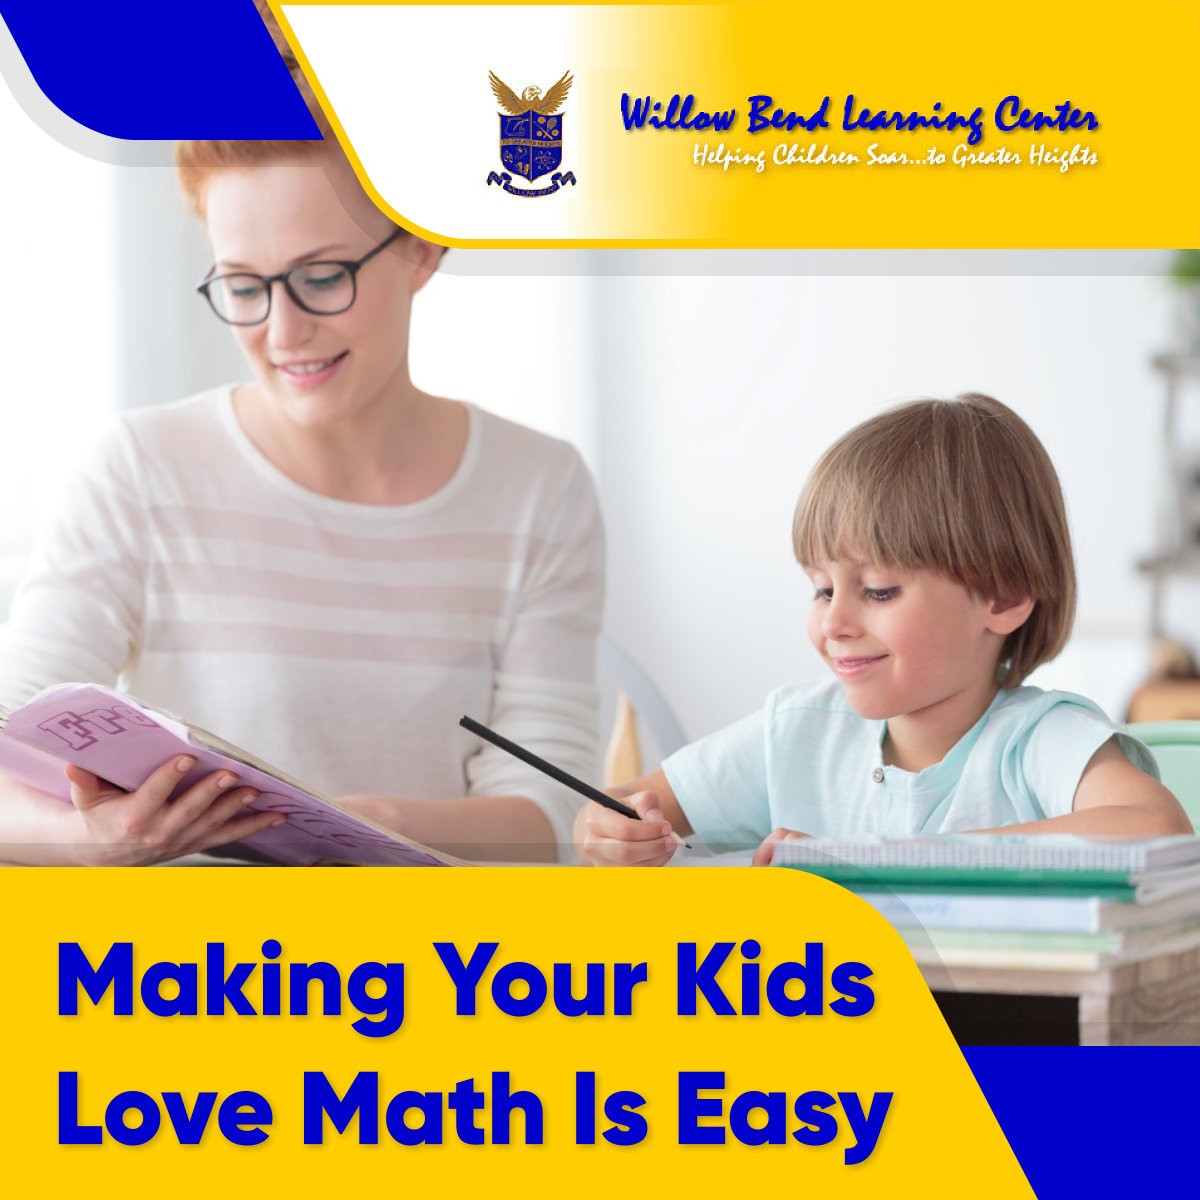 The majority of the population finds math challenging. But as much as we try to avoid it, math is useful everywhere. As parents, make your parents love math by:

Read more: pinterest.com/willowbendlear…

#PlanoTX #Preschool #LoveMath #EnrollNow #WillowBendLearningCenter